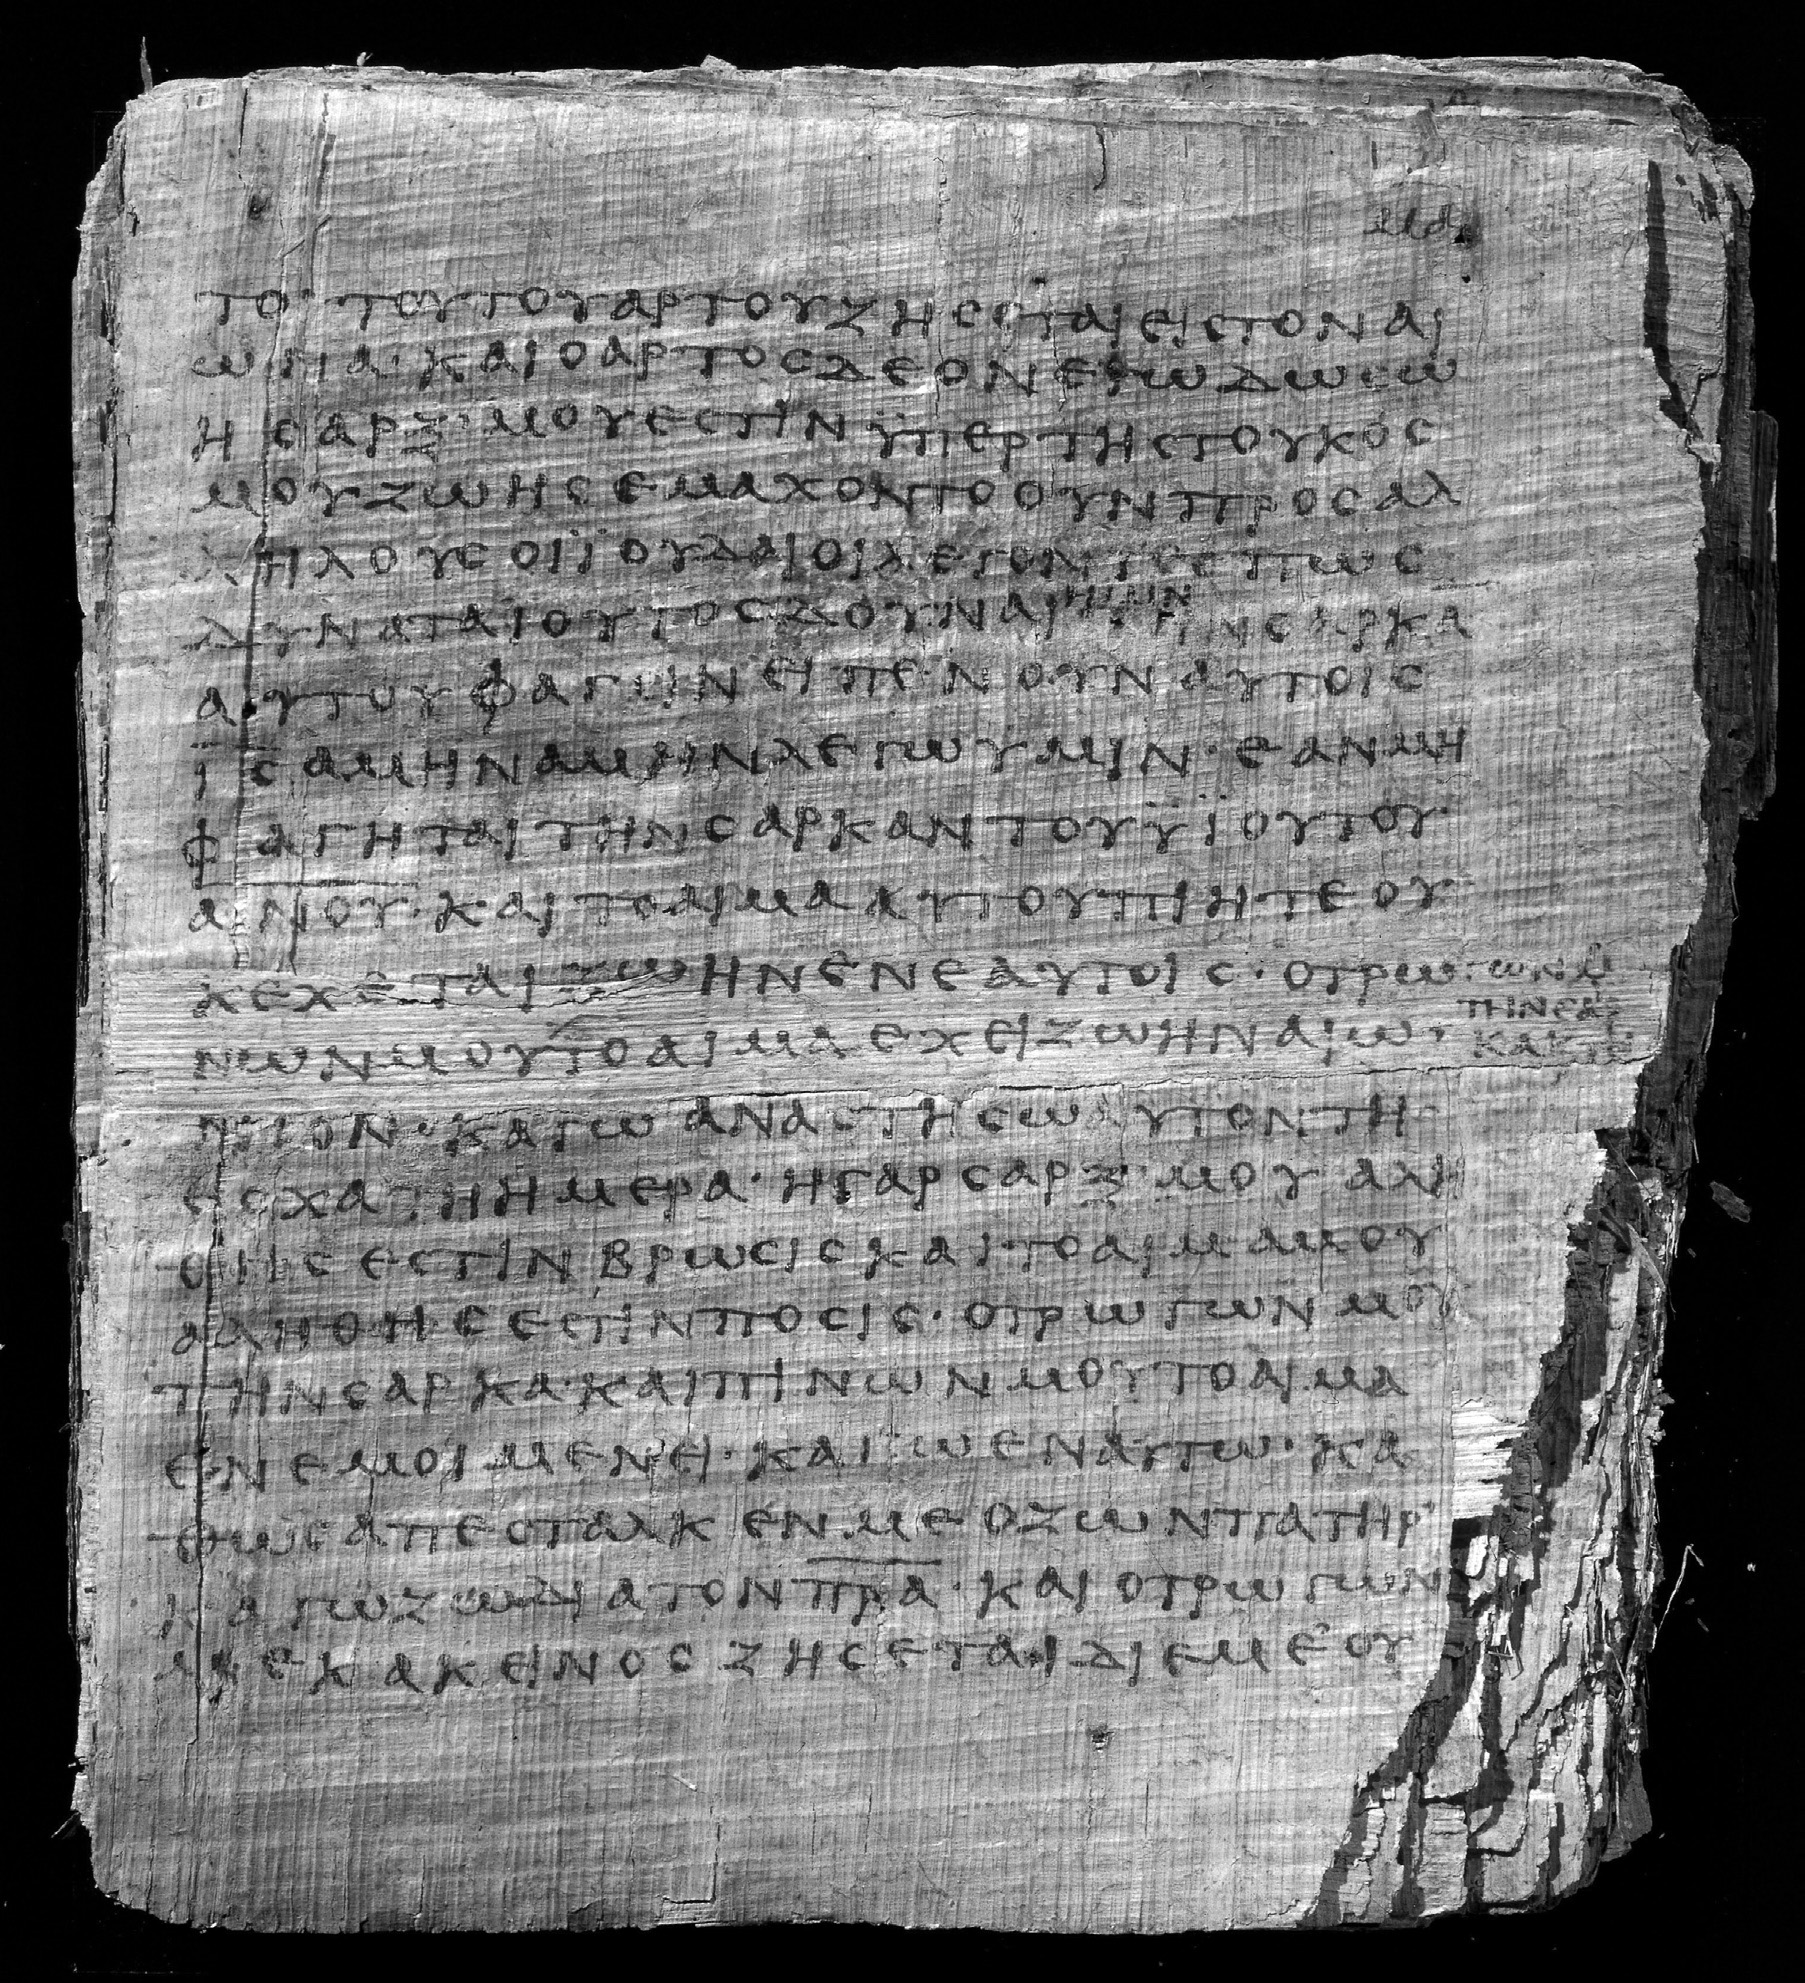 Image of the papyrus codex